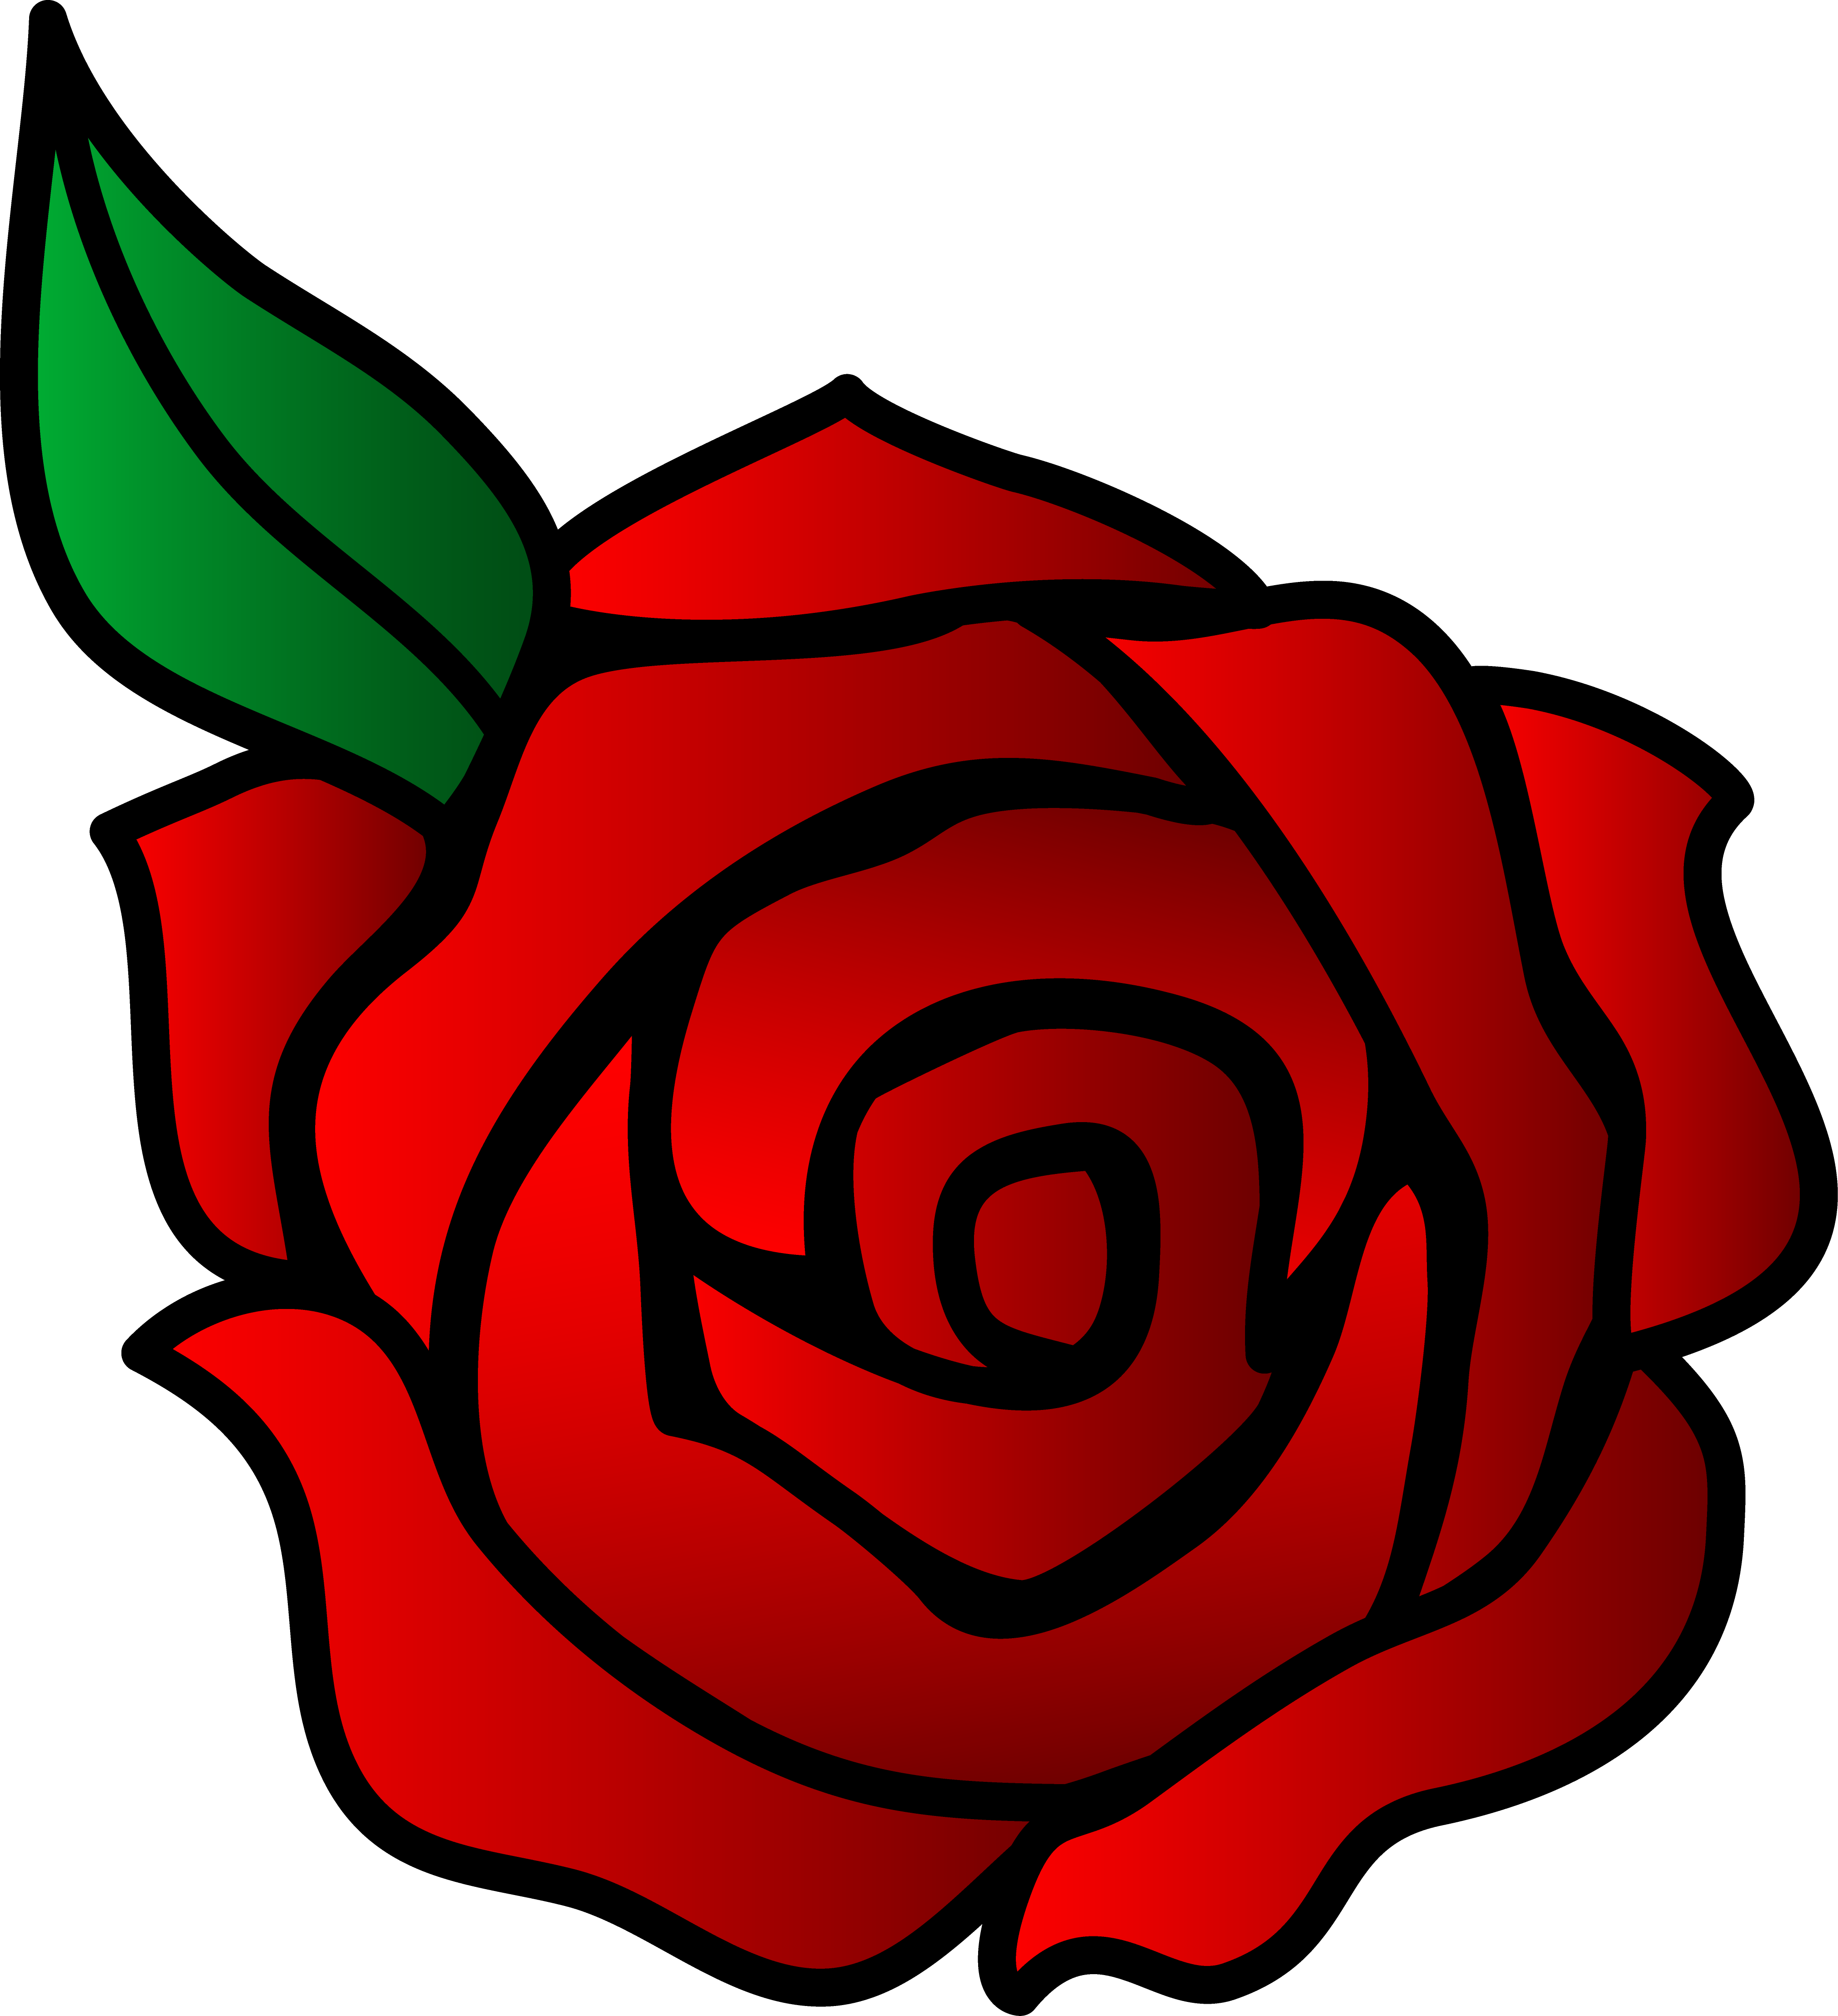 Red Rose Clip Art Images | Clipart Panda - Free Clipart Images